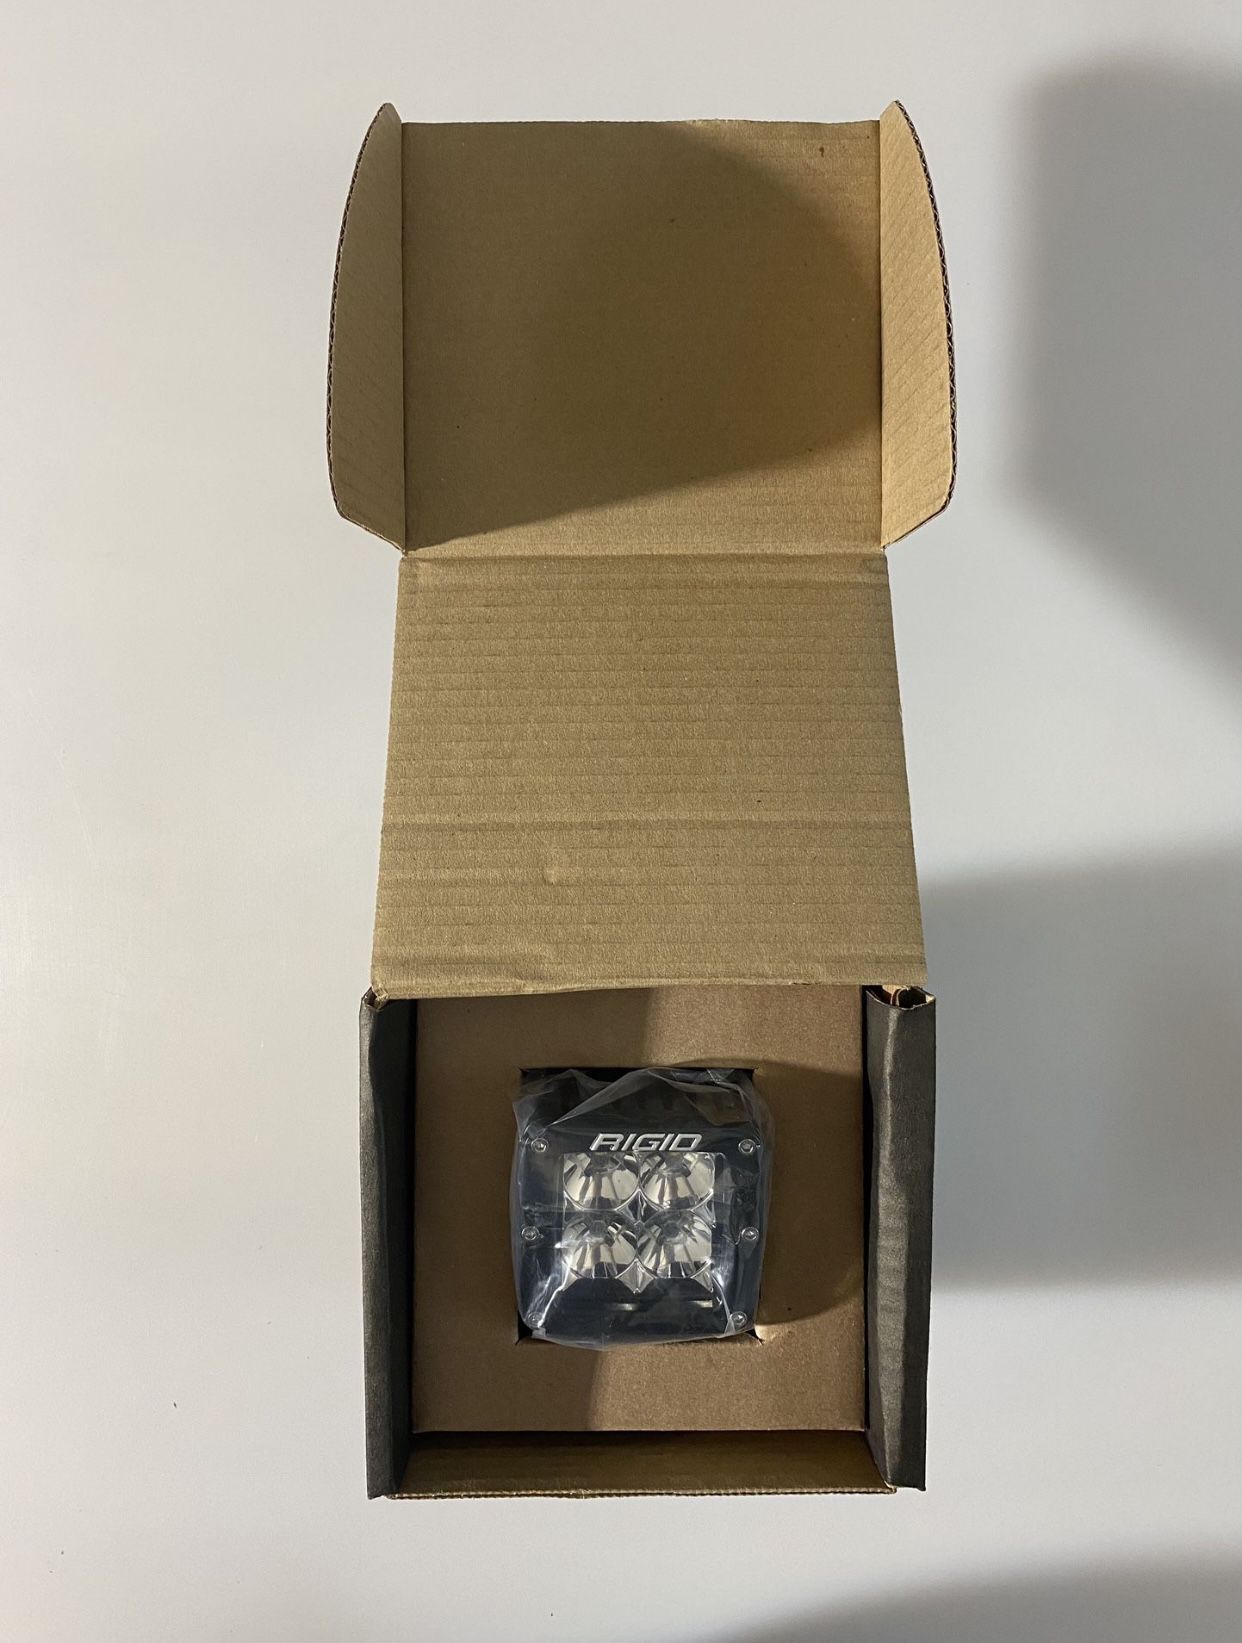 *(Brand New / Still In Boxes)* Rigid D-Series Pro Flood Surface Mount Light Cubes w/ Hardware (3” X 3”)